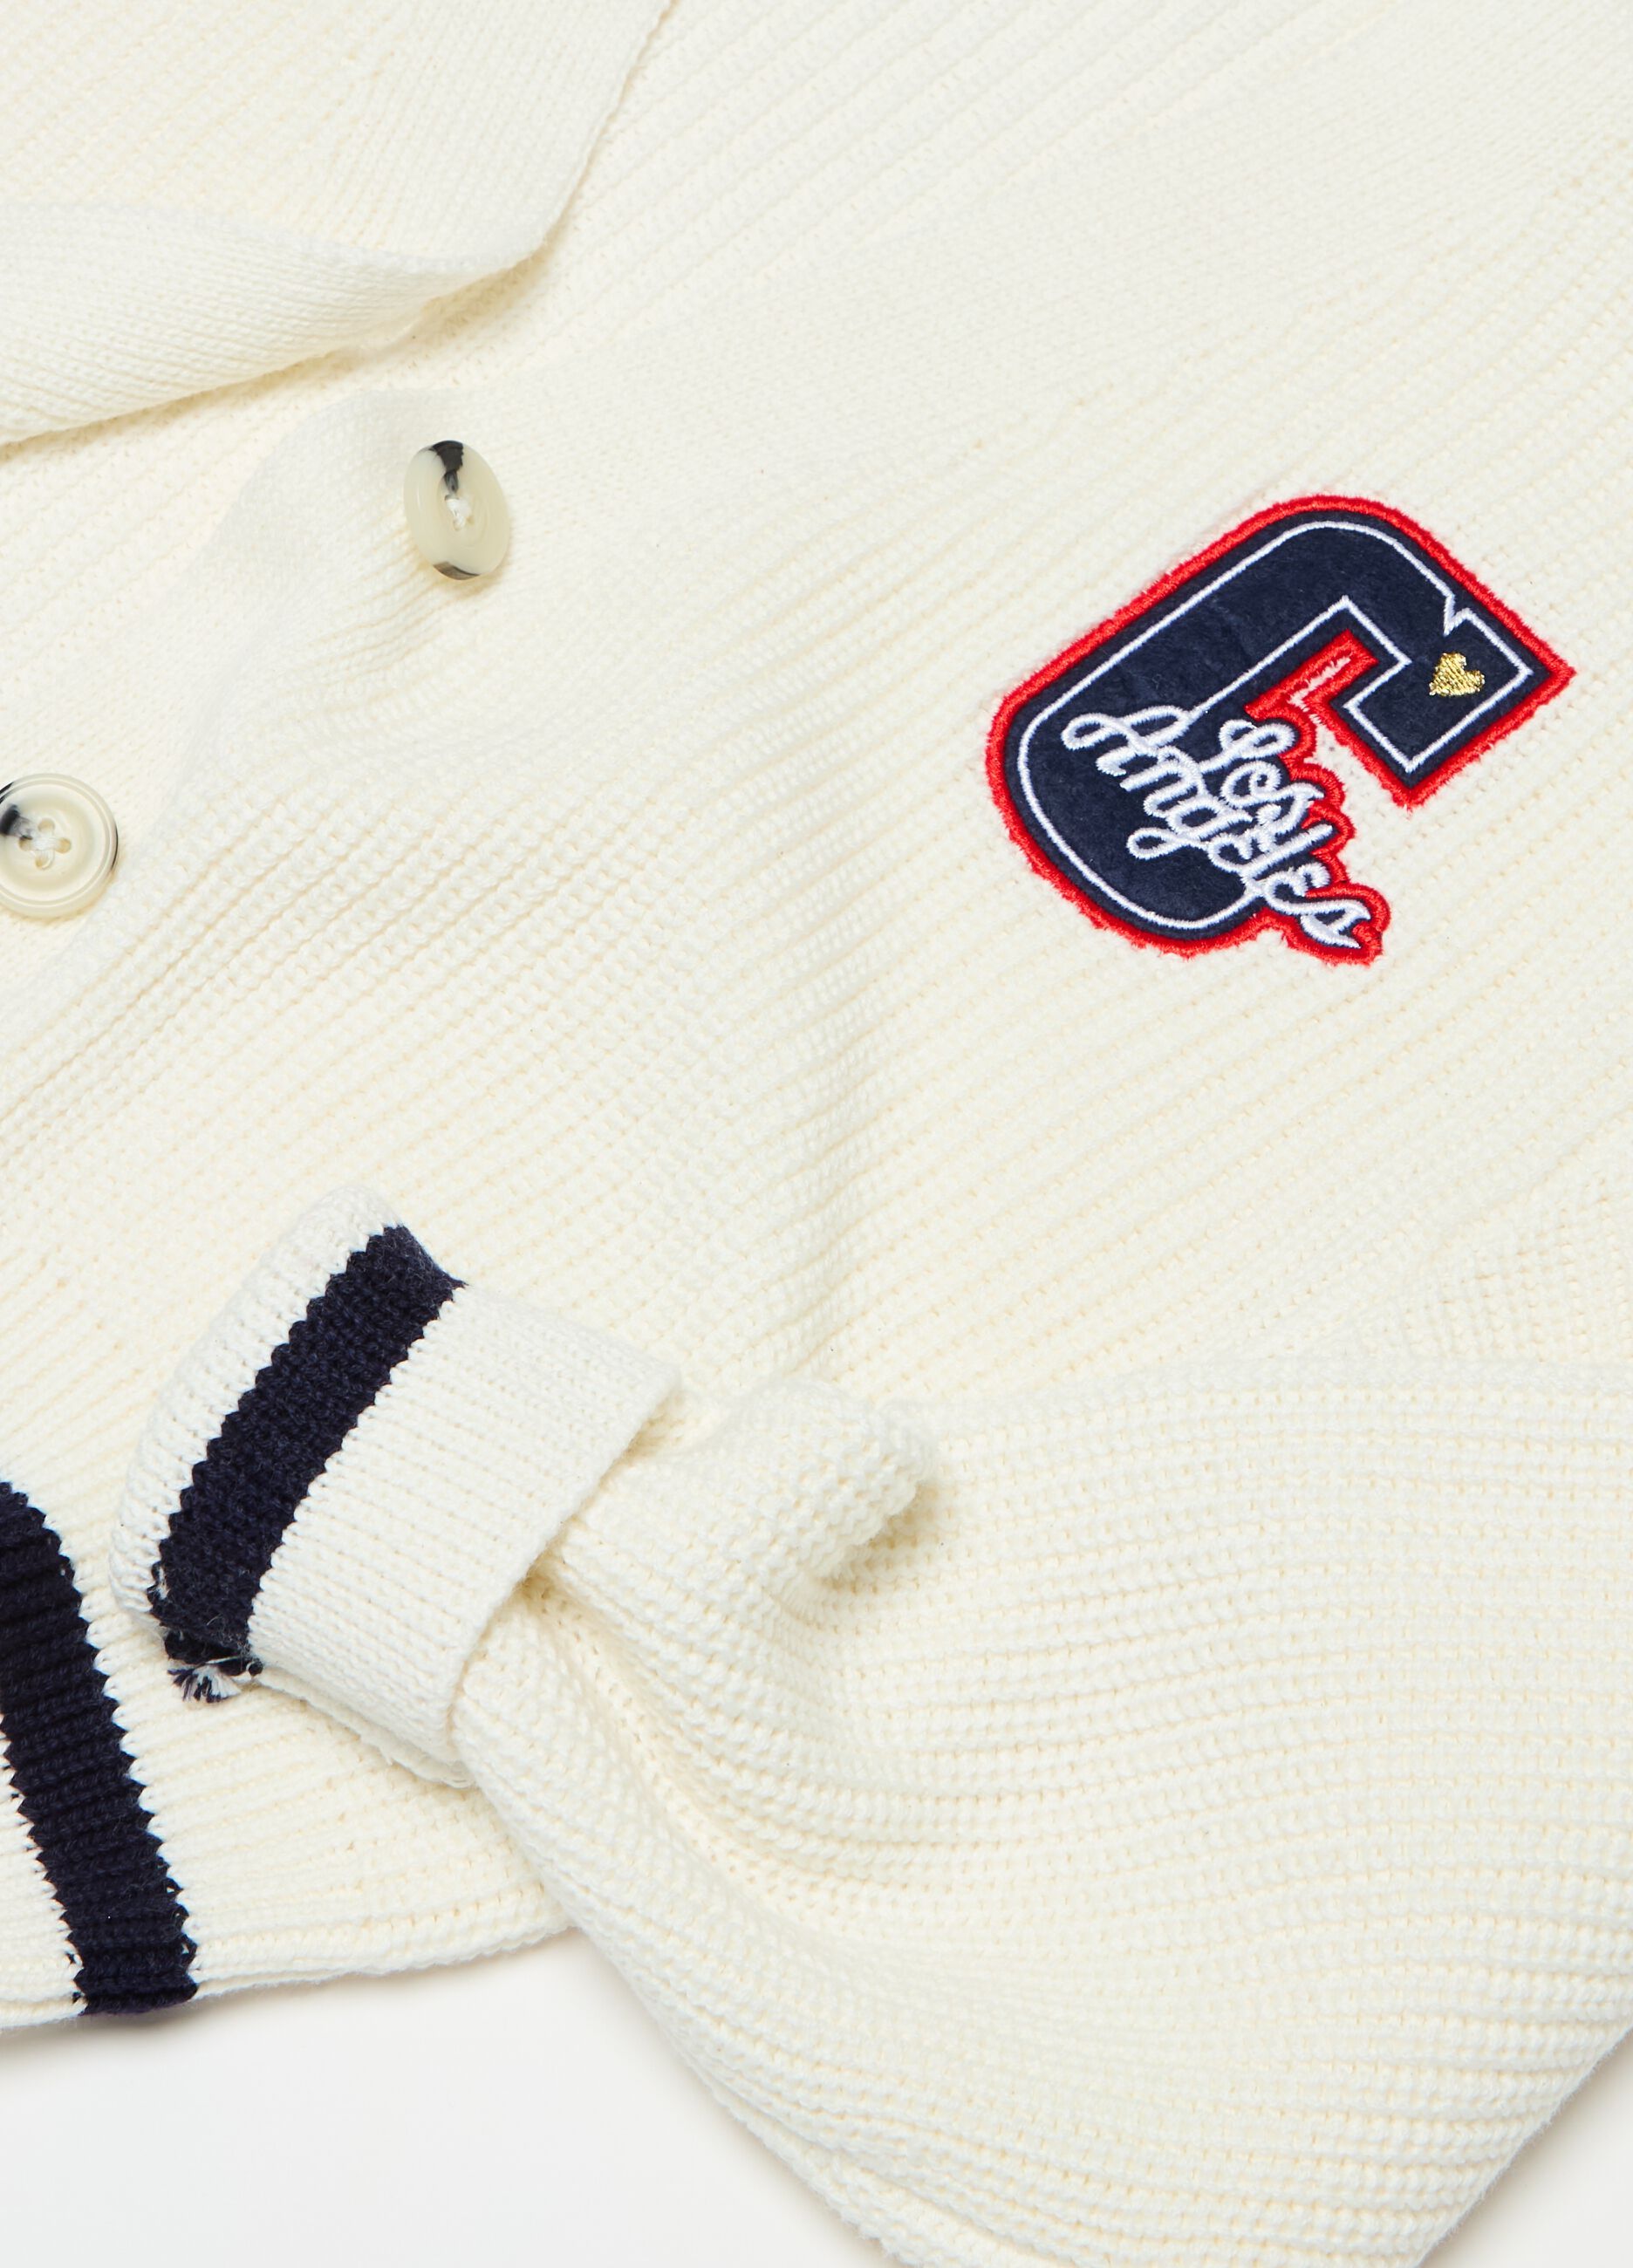 Crop cardigan with college crest embroidery